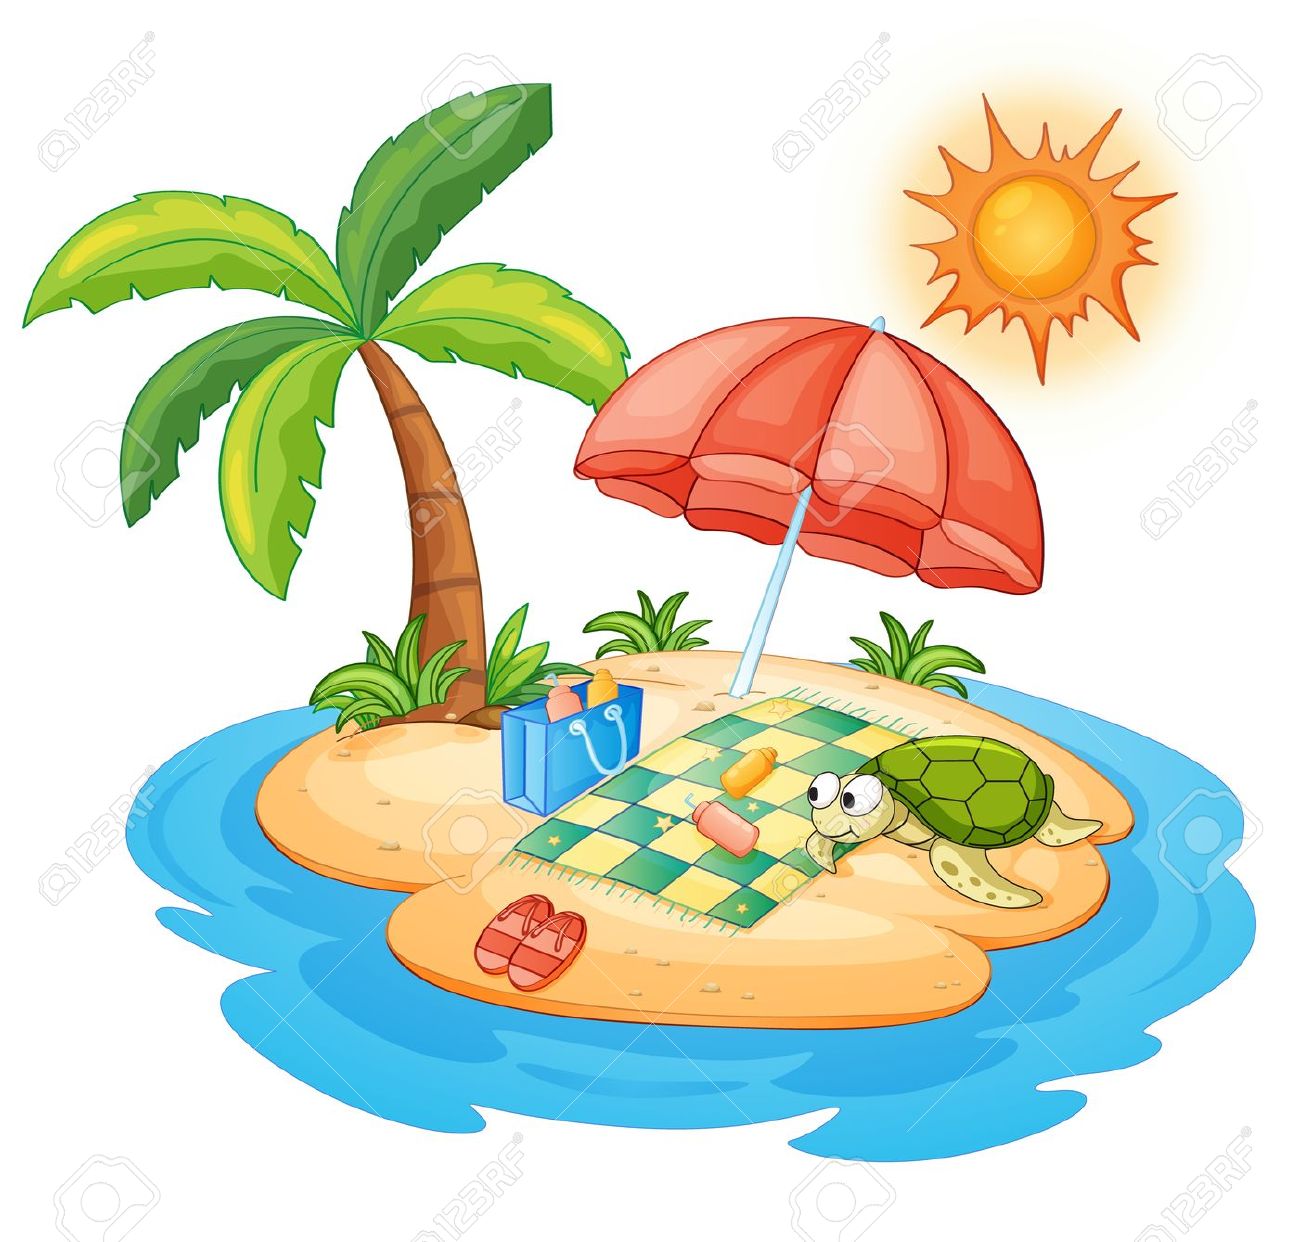 clipart of islands - photo #40